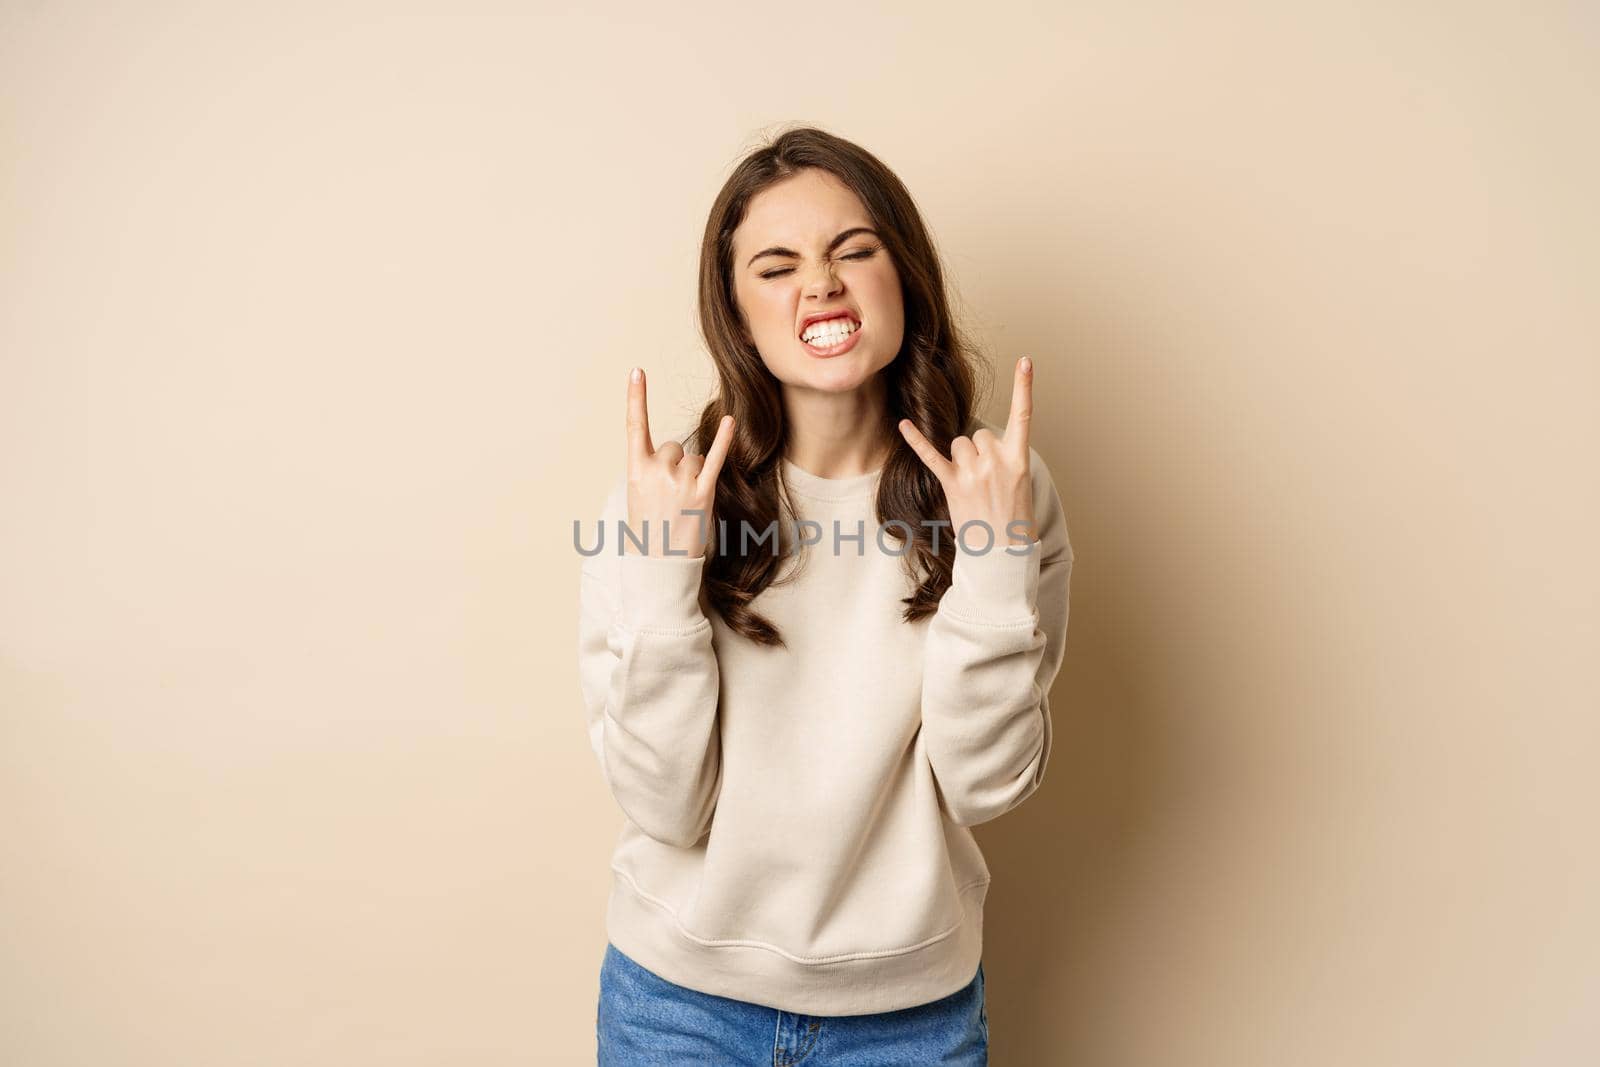 Happy young woman enjoying music, having fun, showing rock on, heavy metal finger horns gesture, standing over beige background.